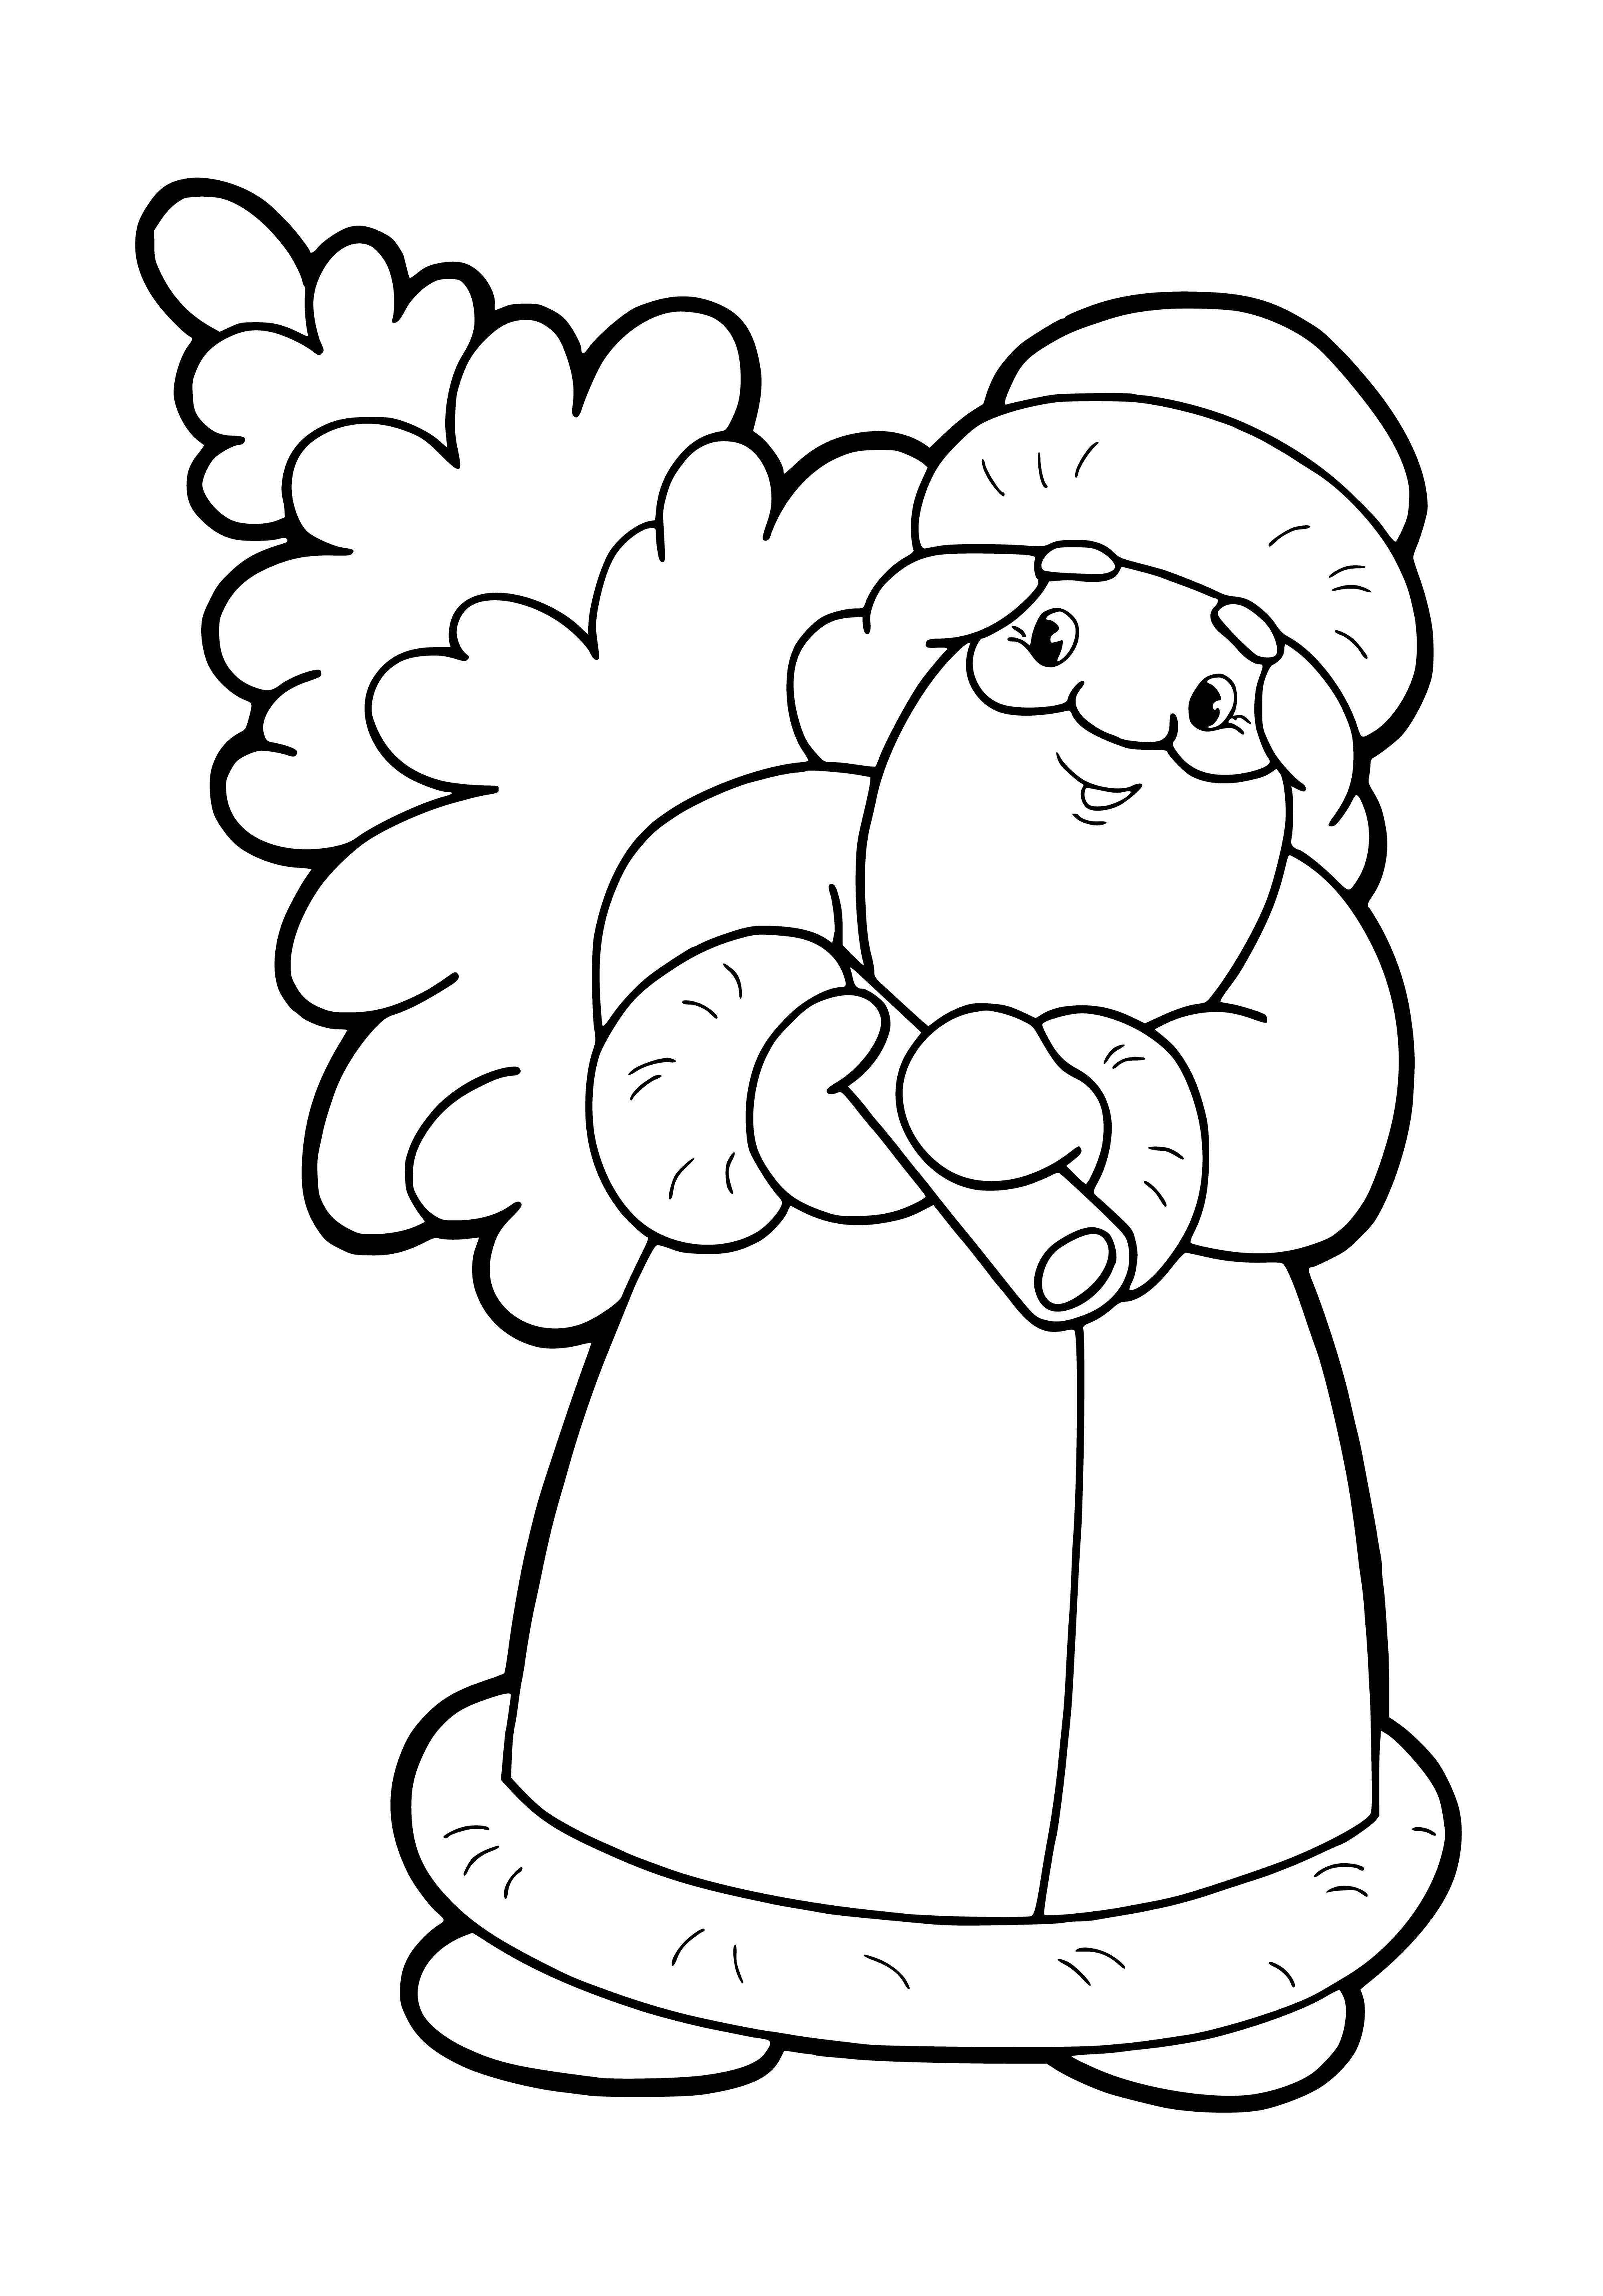 coloring page: Santa admires Christmas tree surrounded by presents, dressed in his typical red and white suit, white beard.